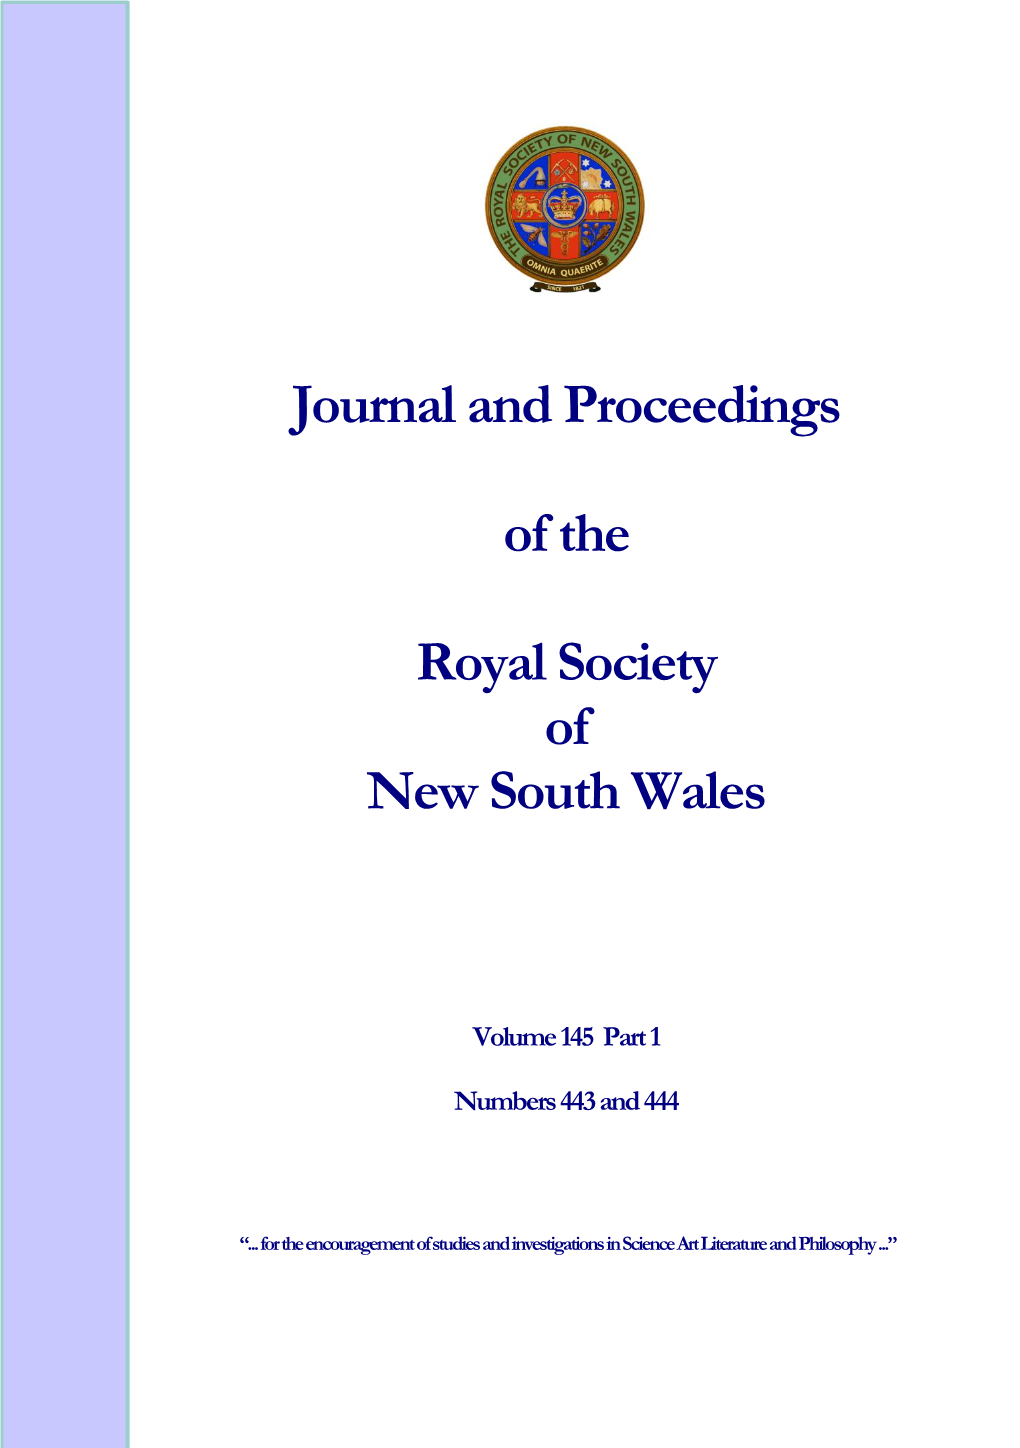 JOURNAL and PROCEEDINGS of the ROYAL SOCIETY of NEW SOUTH WALES ISSN 0035-9173/12/01 Journal and Proceedings of the Royal Society of New South Wales, Vol